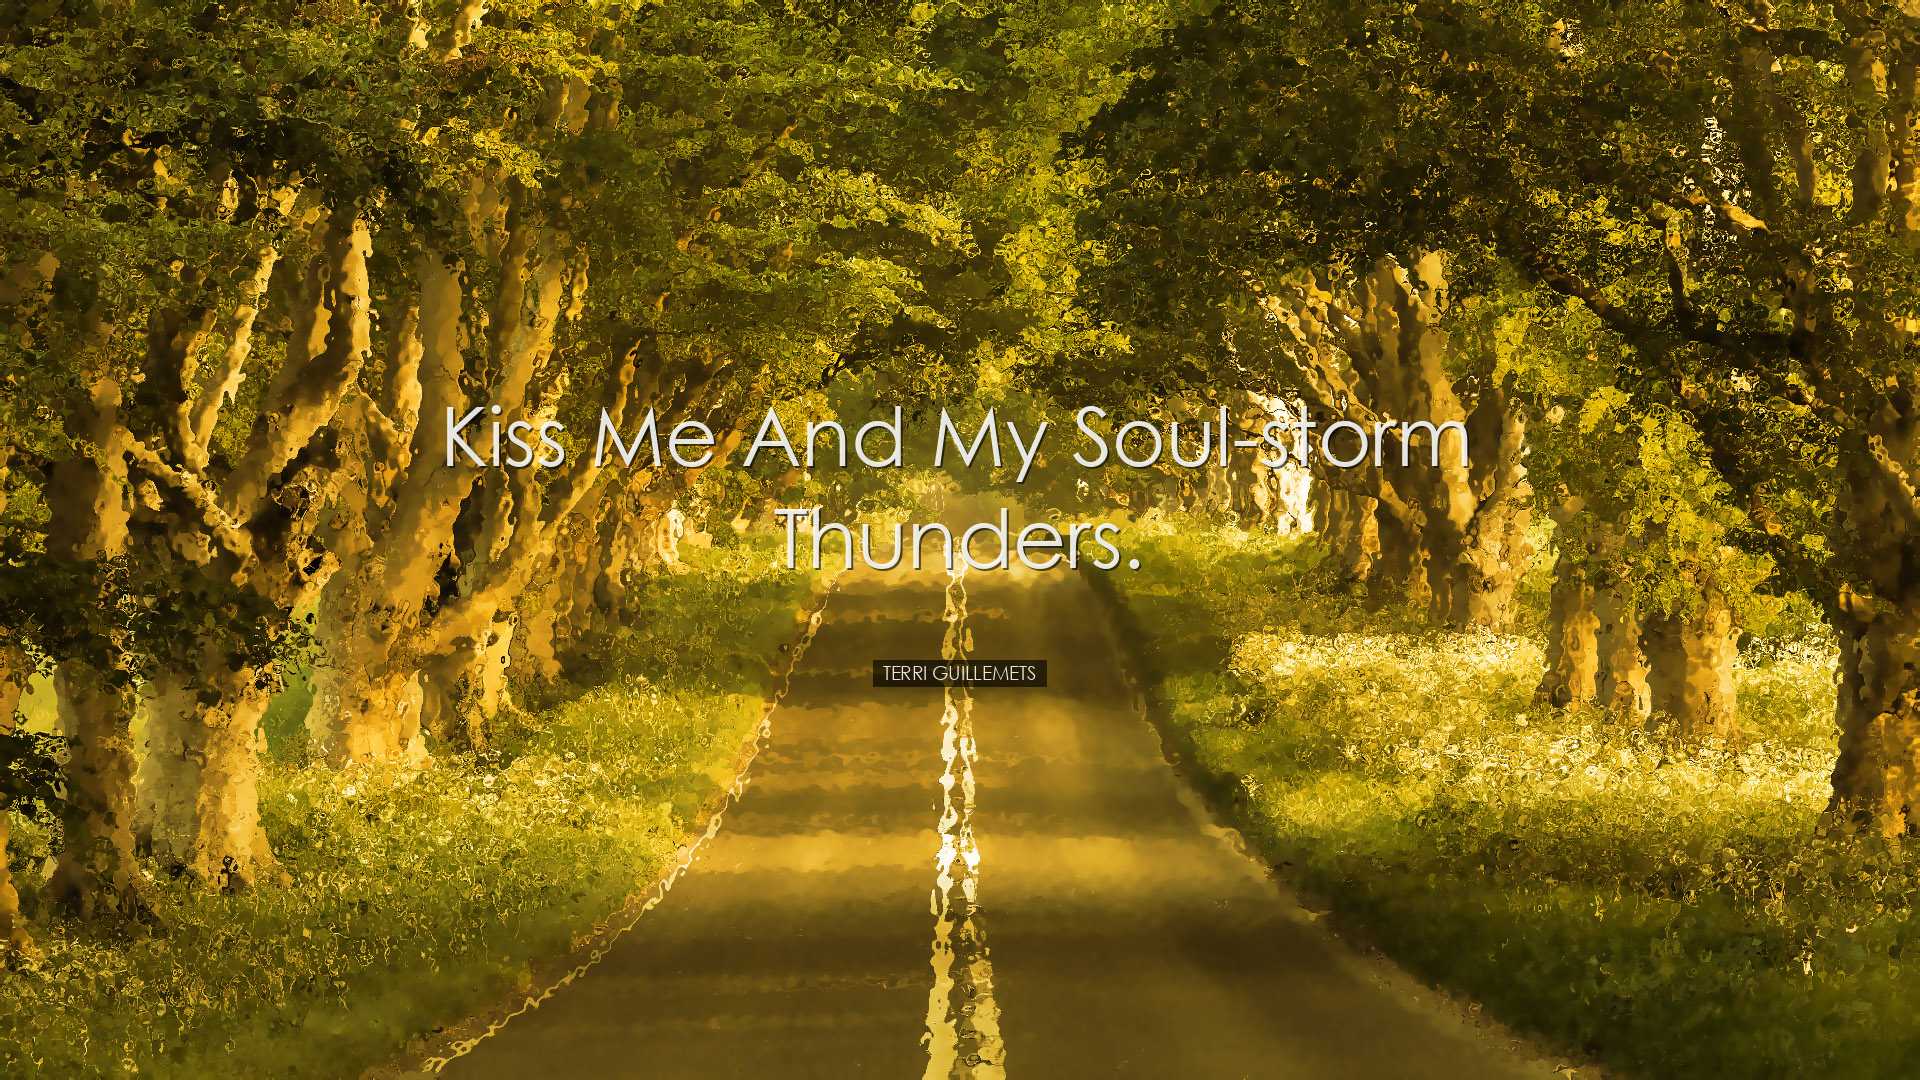 Kiss me and my soul-storm thunders. - Terri Guillemets